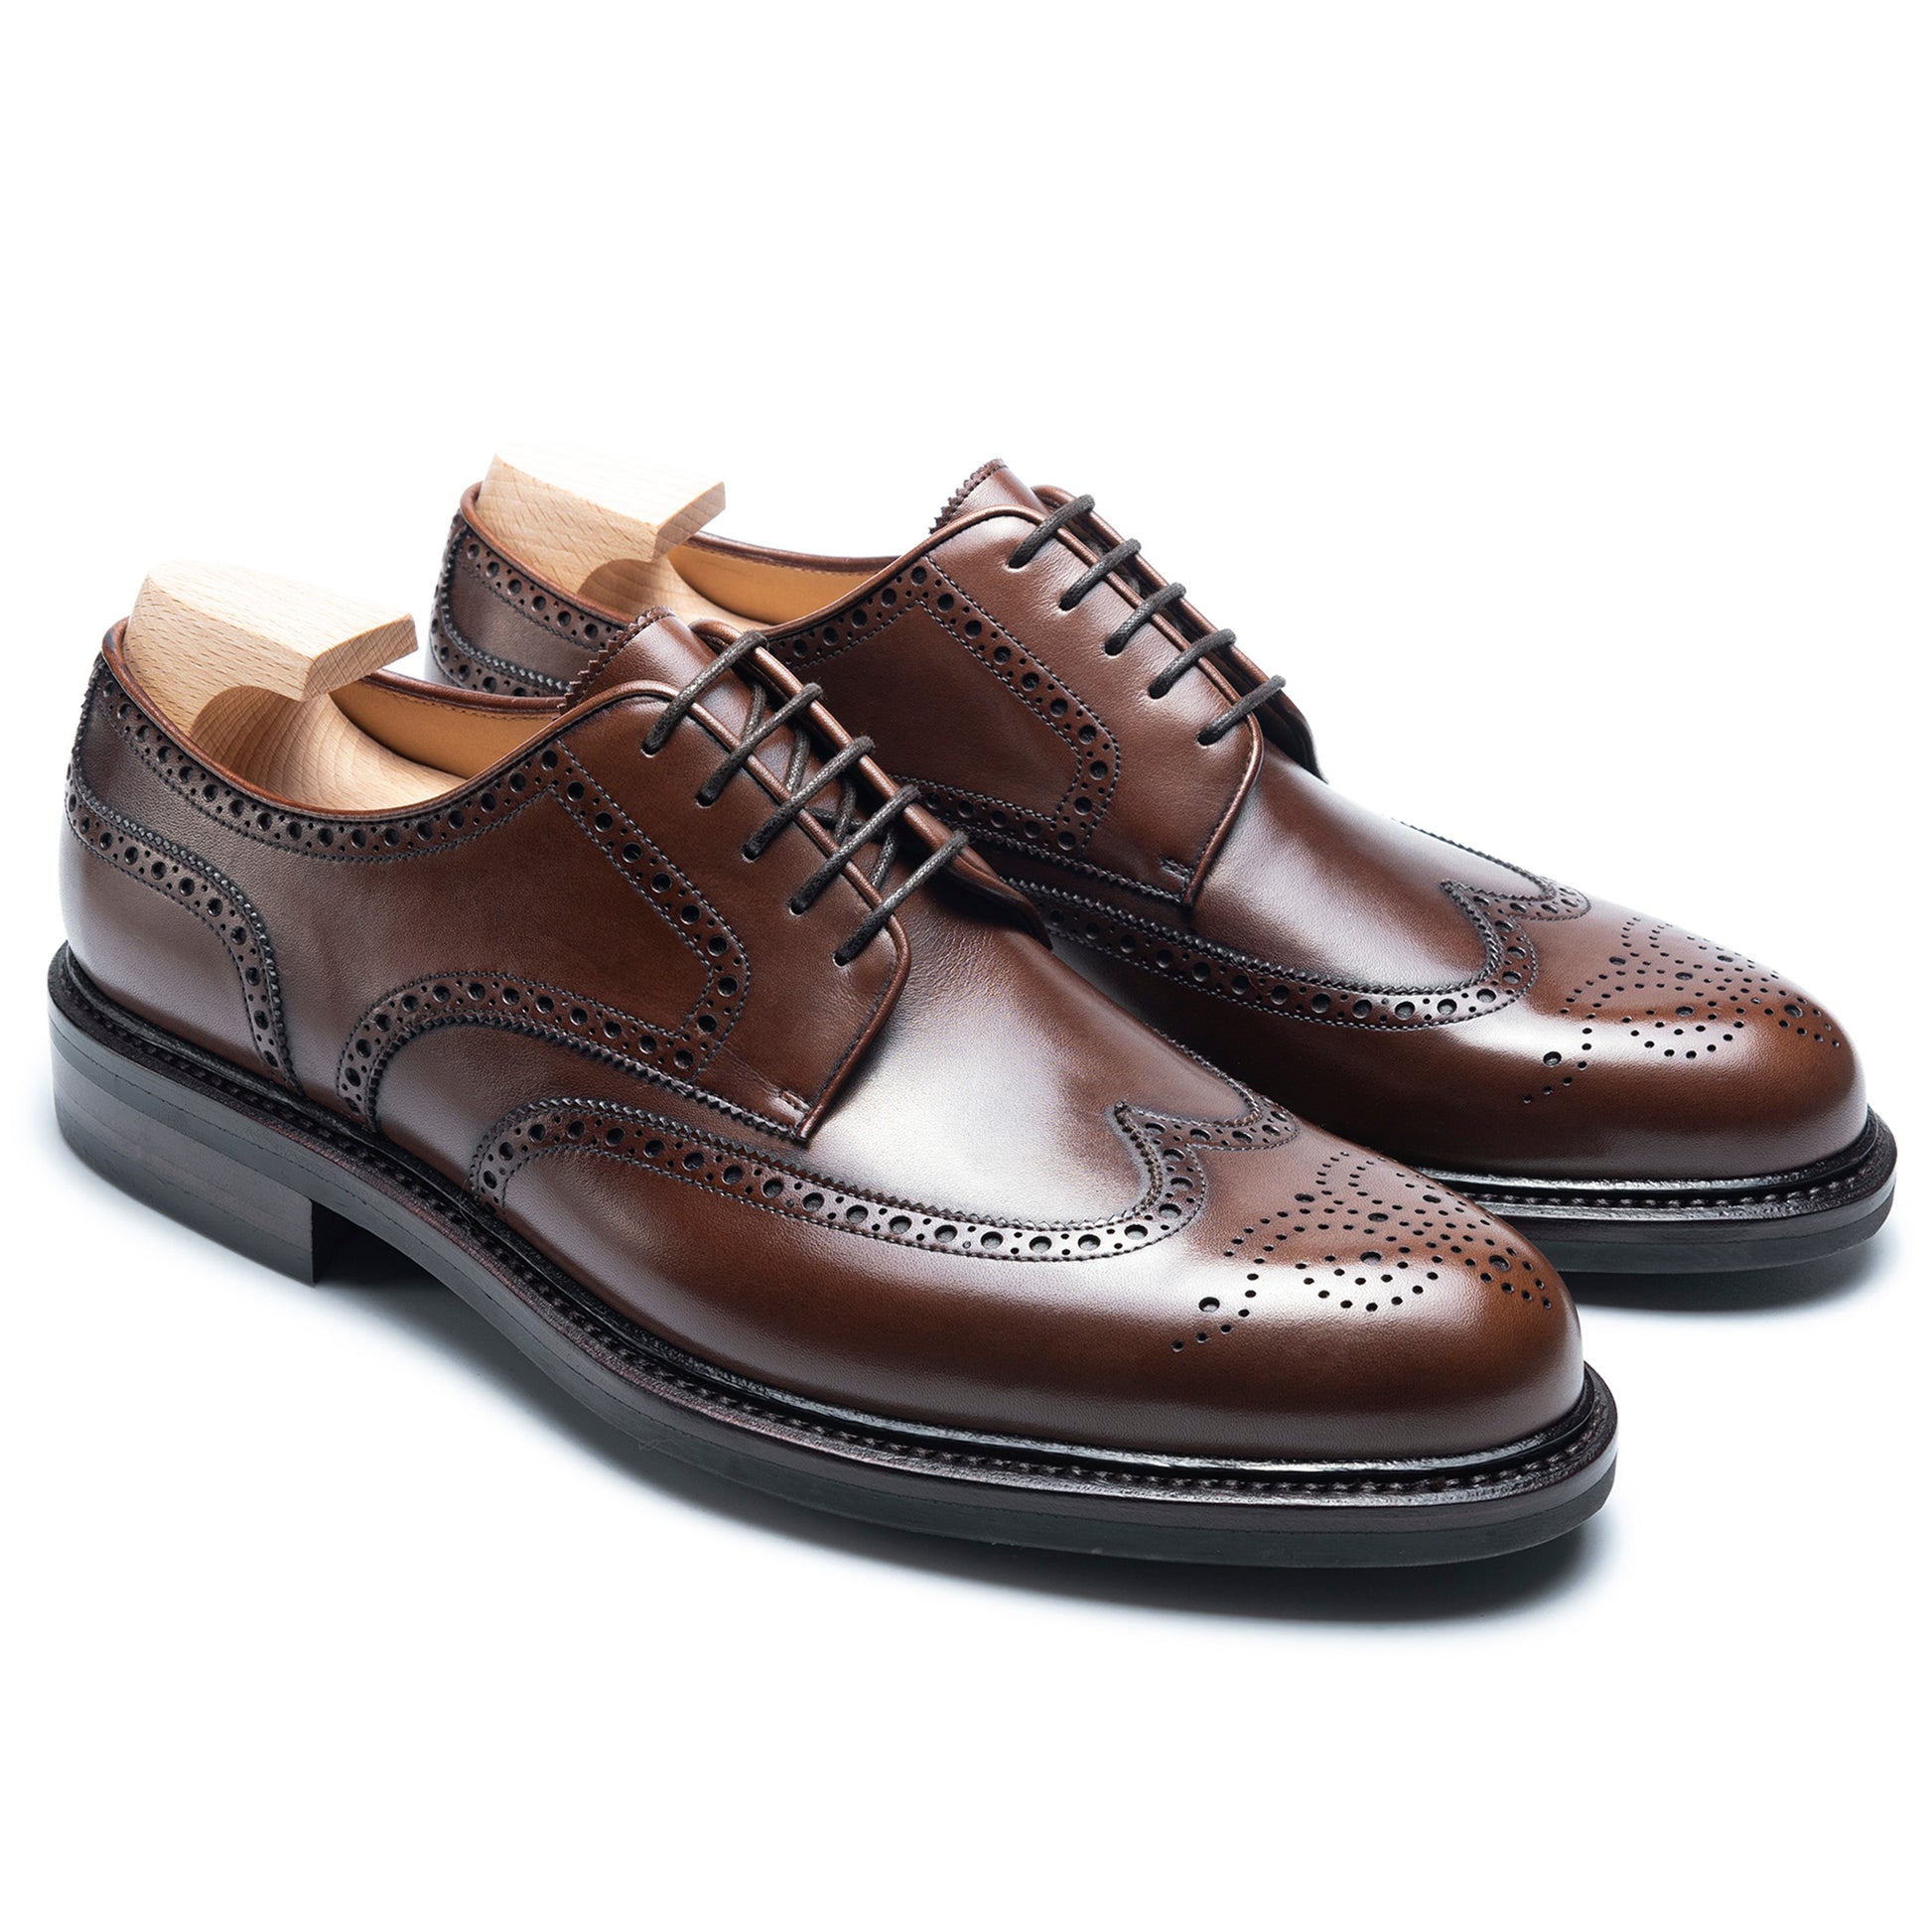 TLB Mallorca leather shoes 679 / MADISON / VEGANO BROWN